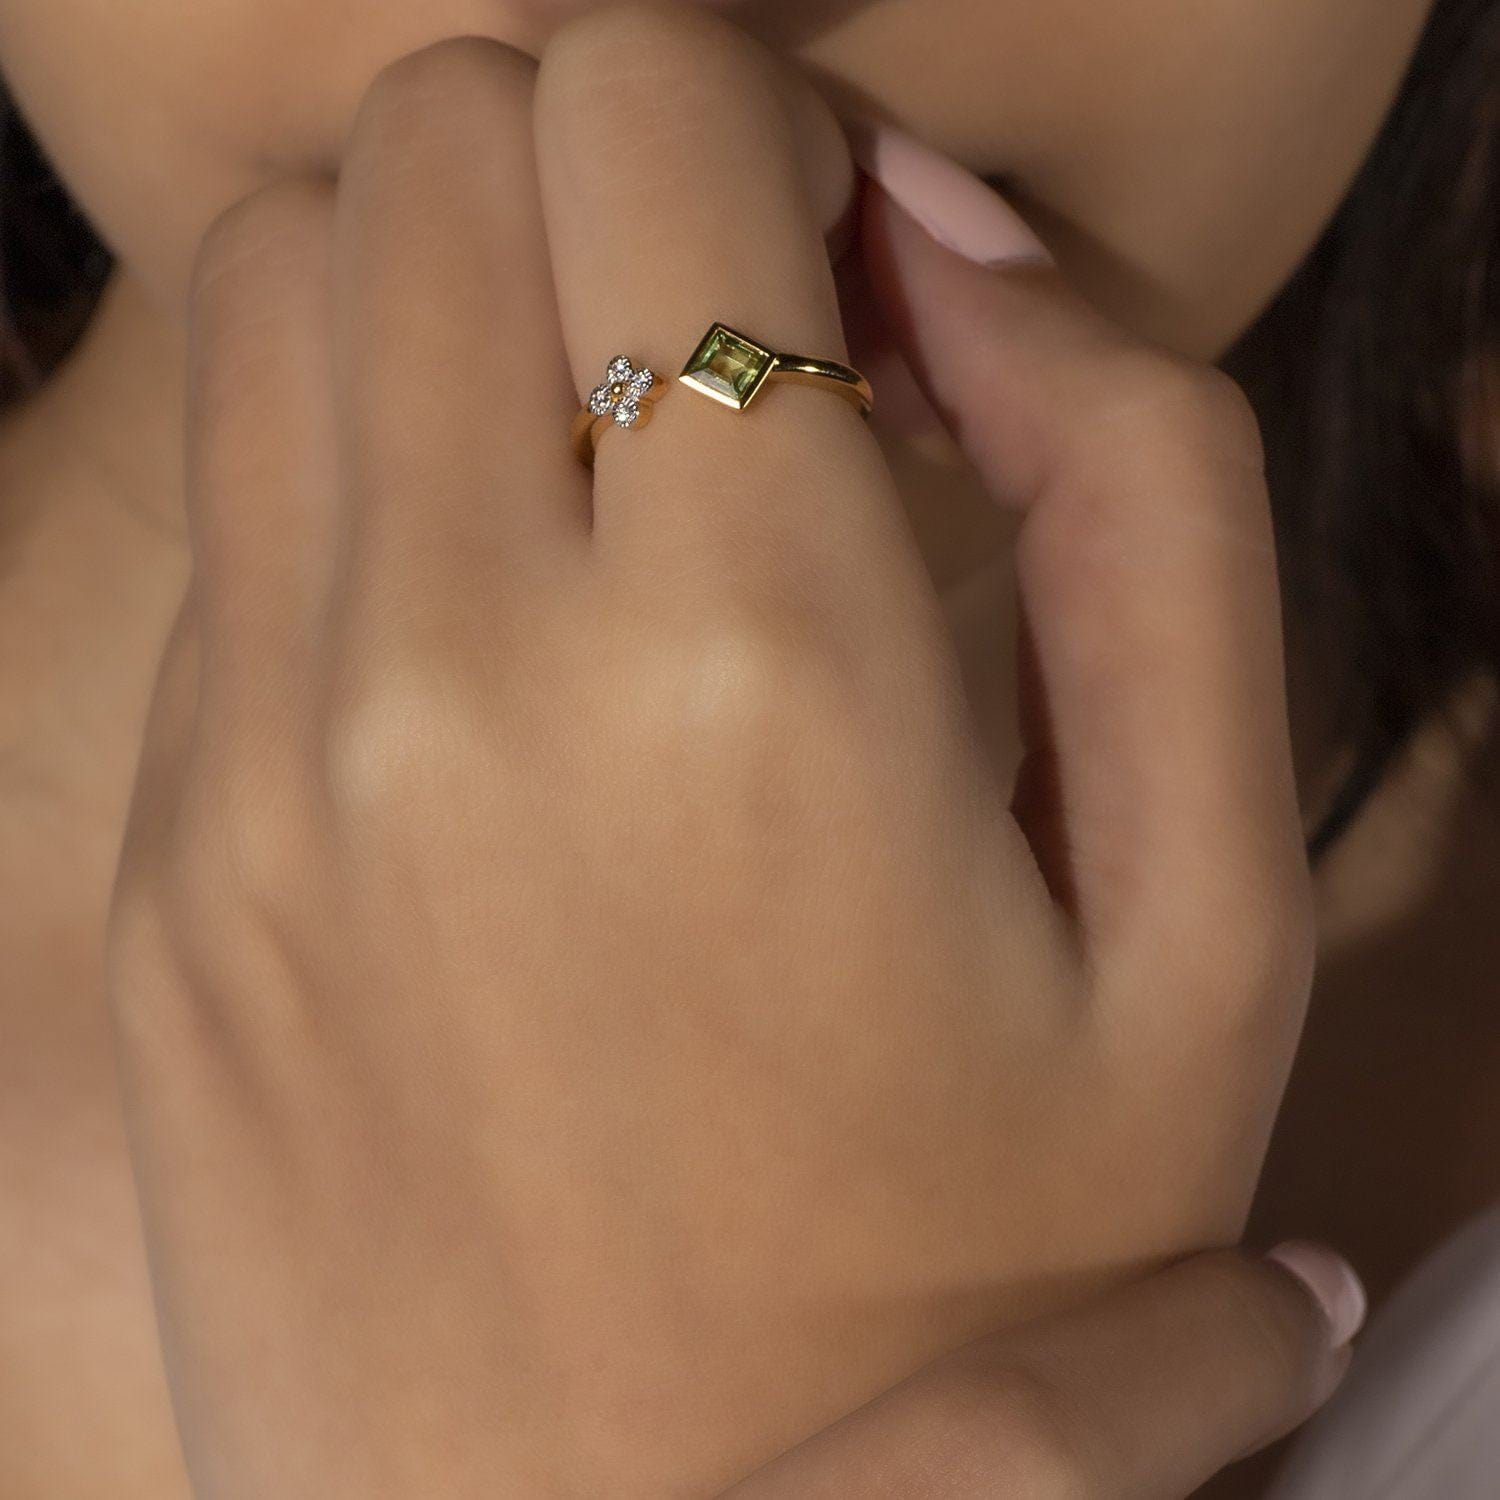 Contemporary Peridot & Diamond Open Ring in 9ct Yellow Gold on model